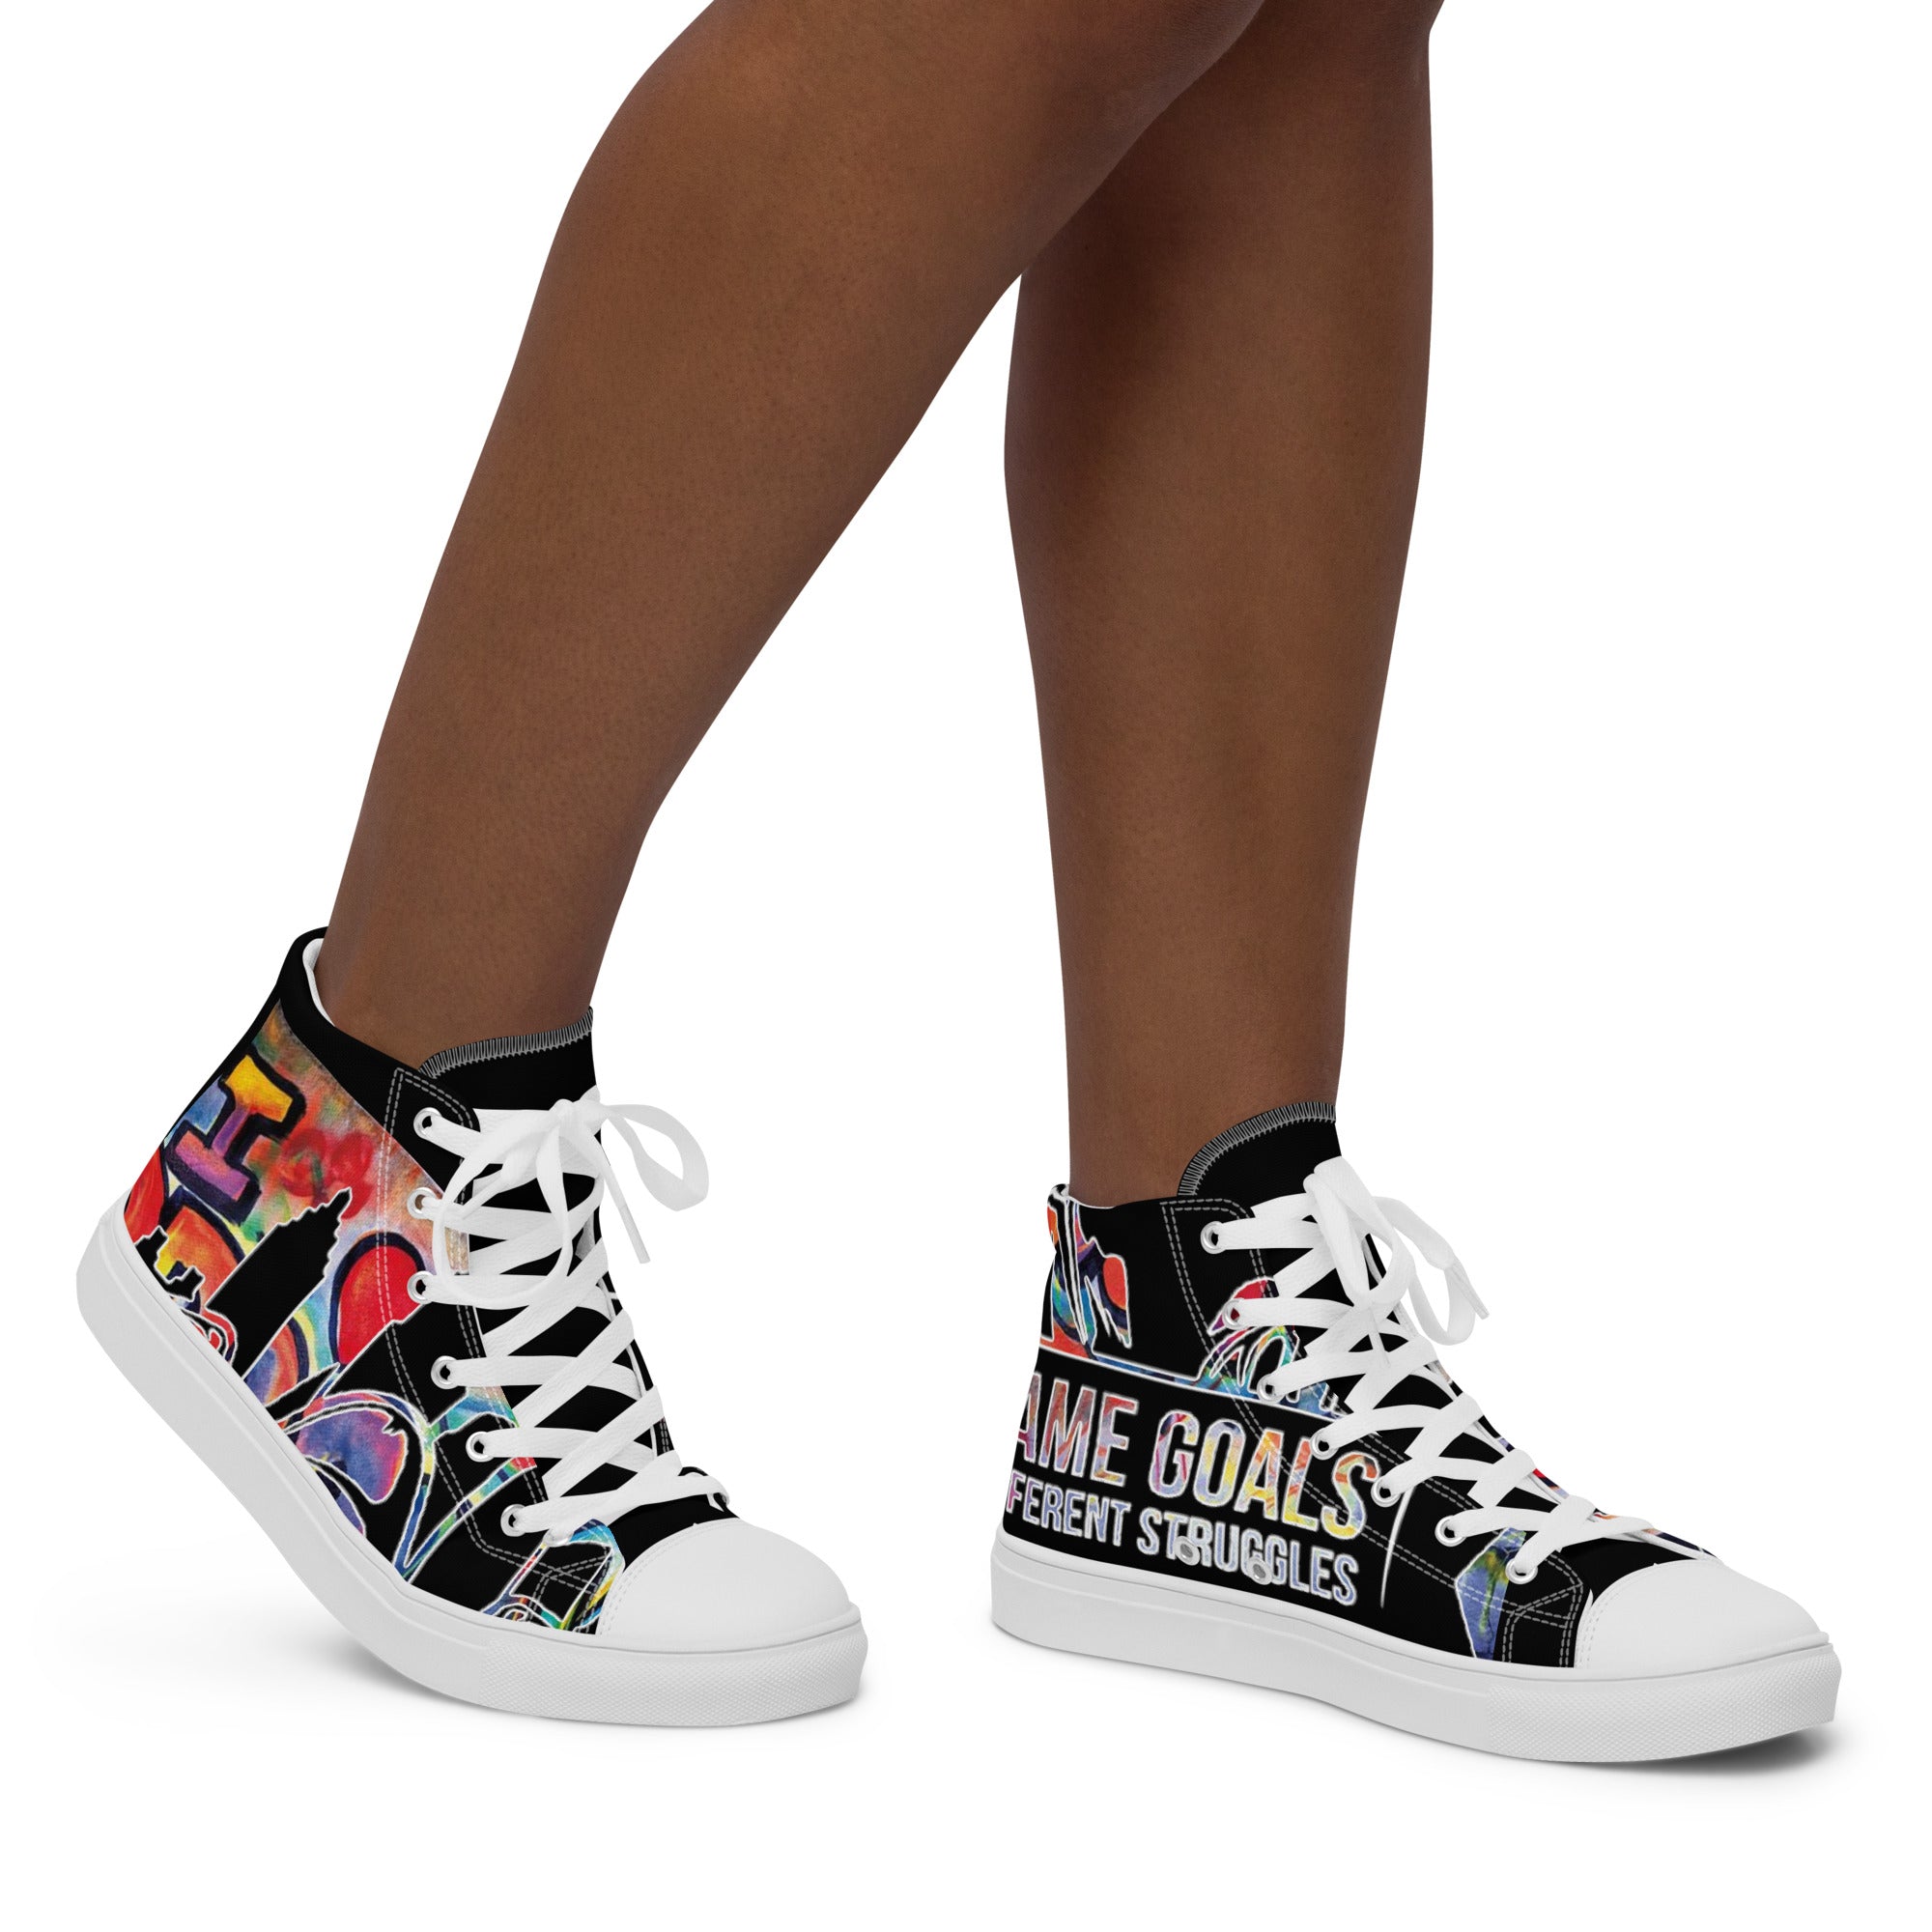 Same Goals Different Struggles Women’s high top canvas shoes